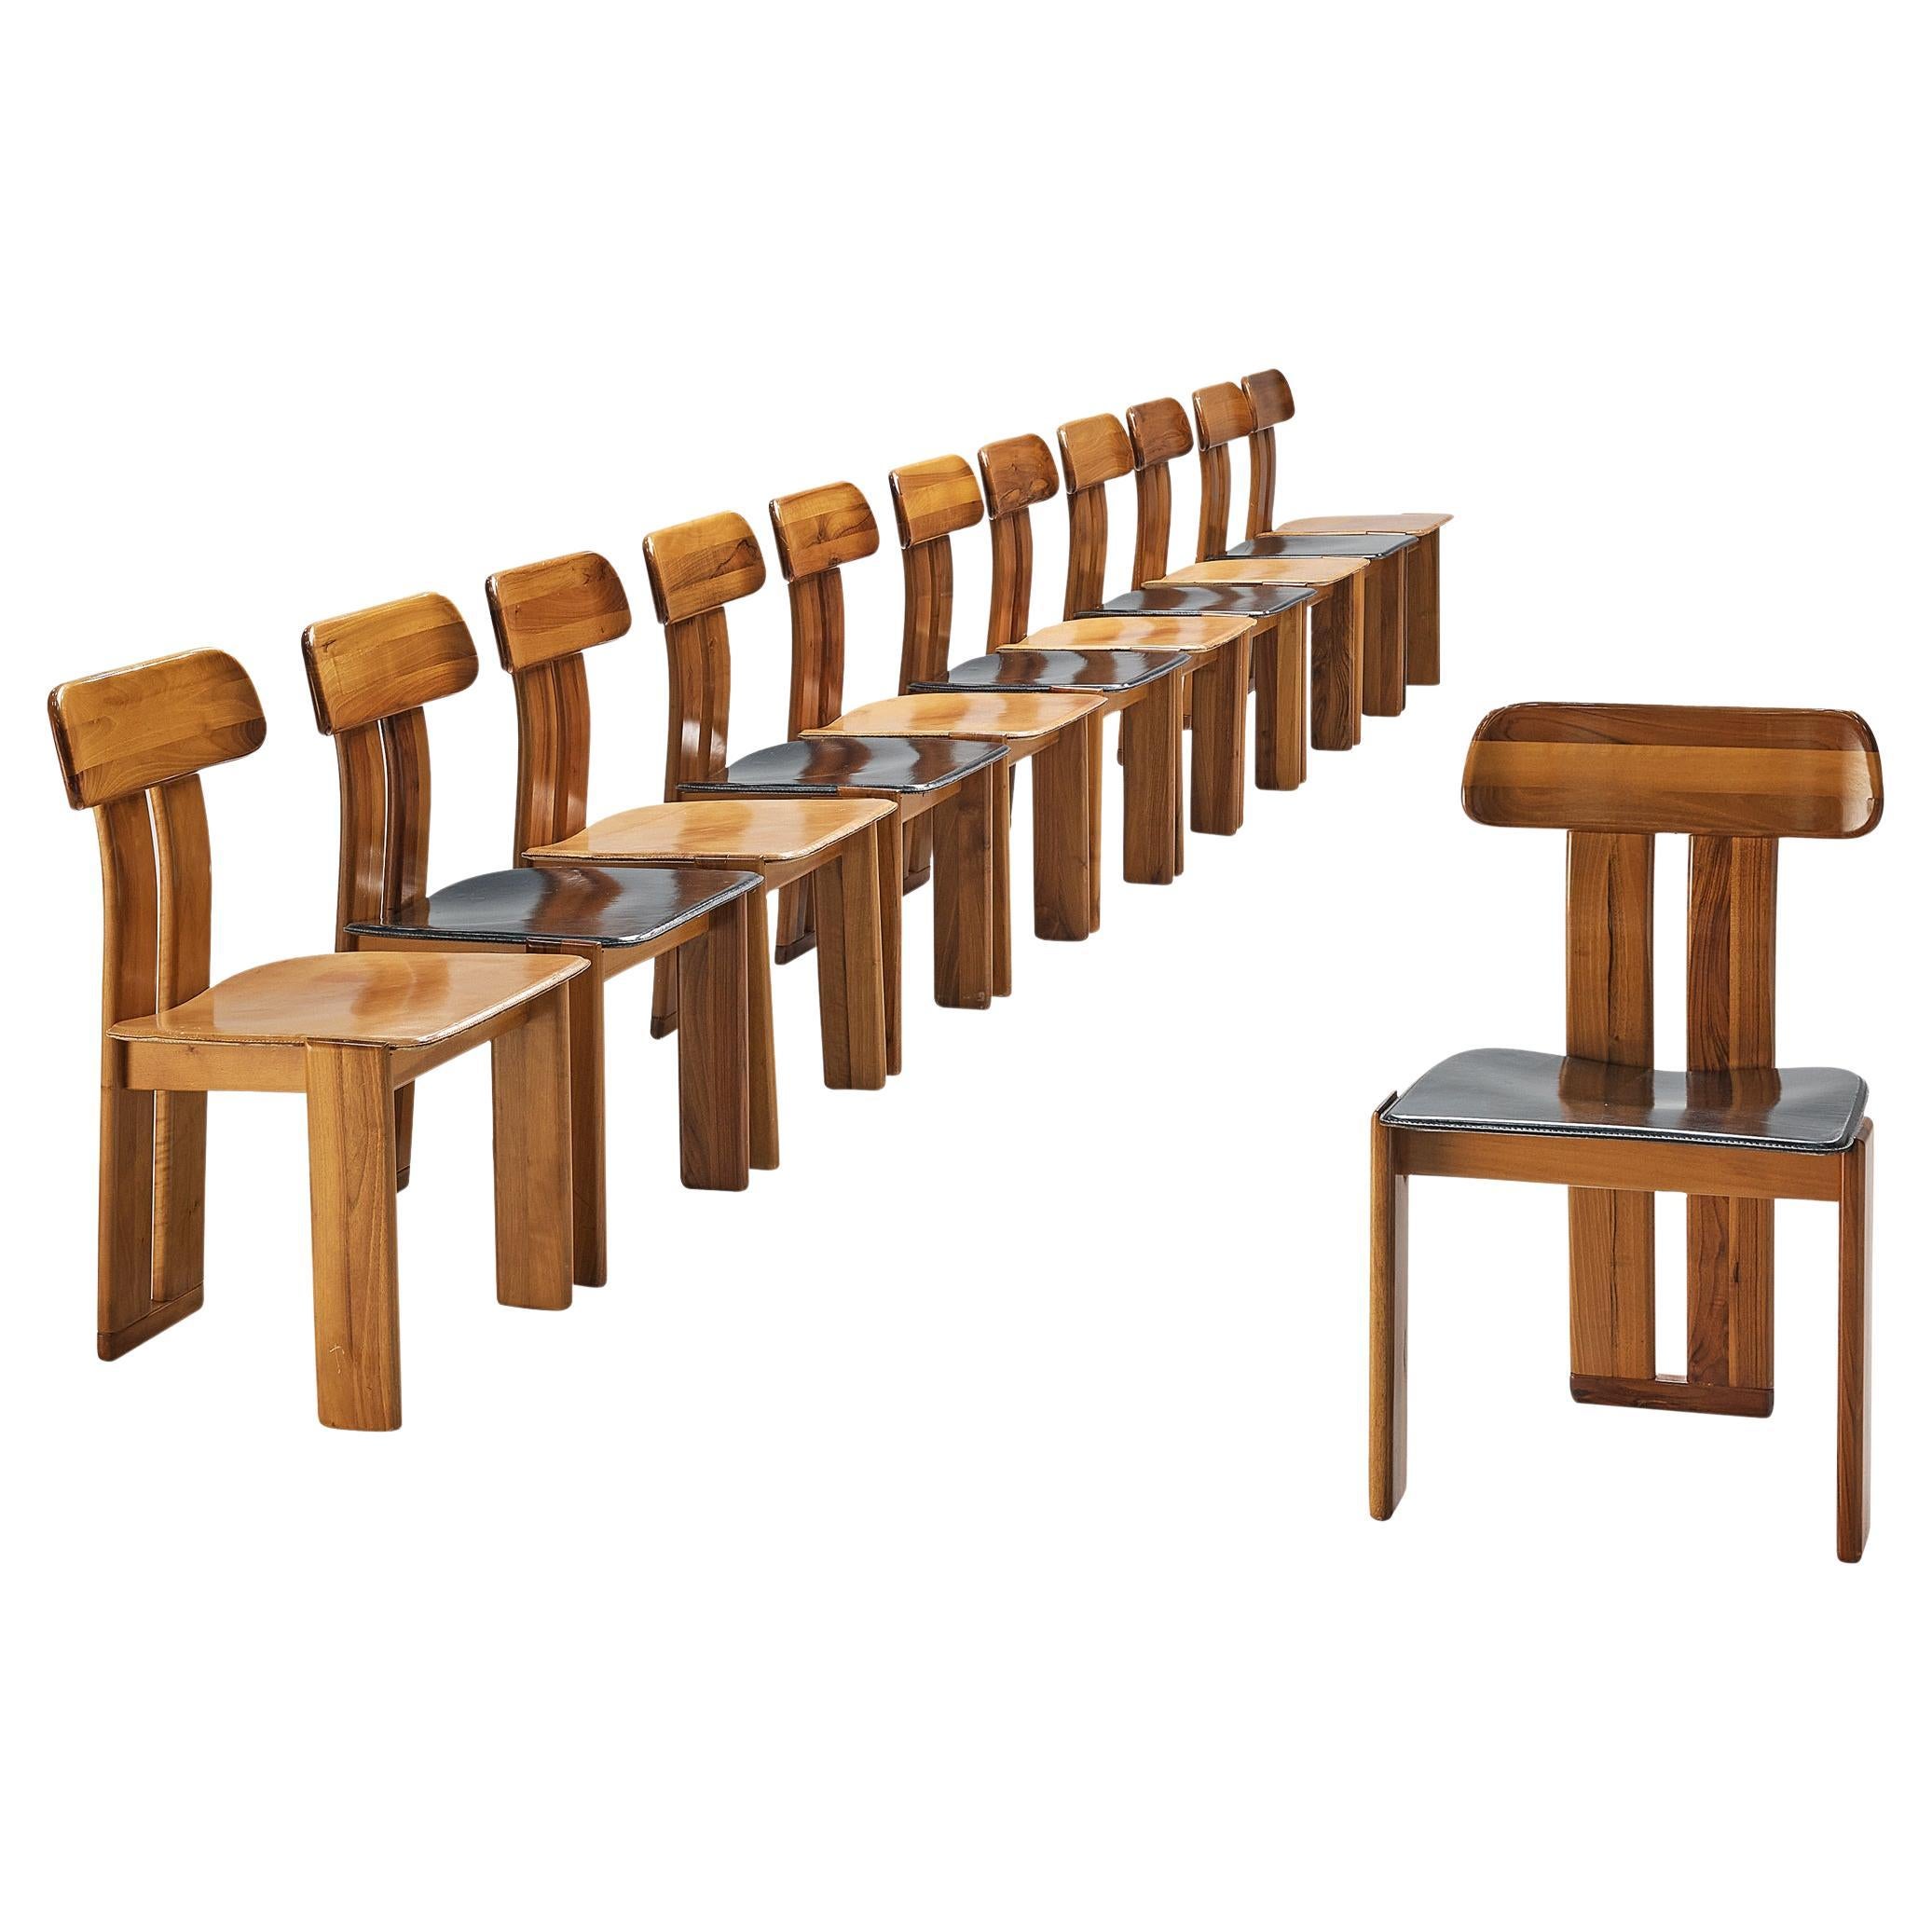 Mario Marenco for Mobil Girgi Set of Twelve 'Sapporo' Dining Chairs in Walnut